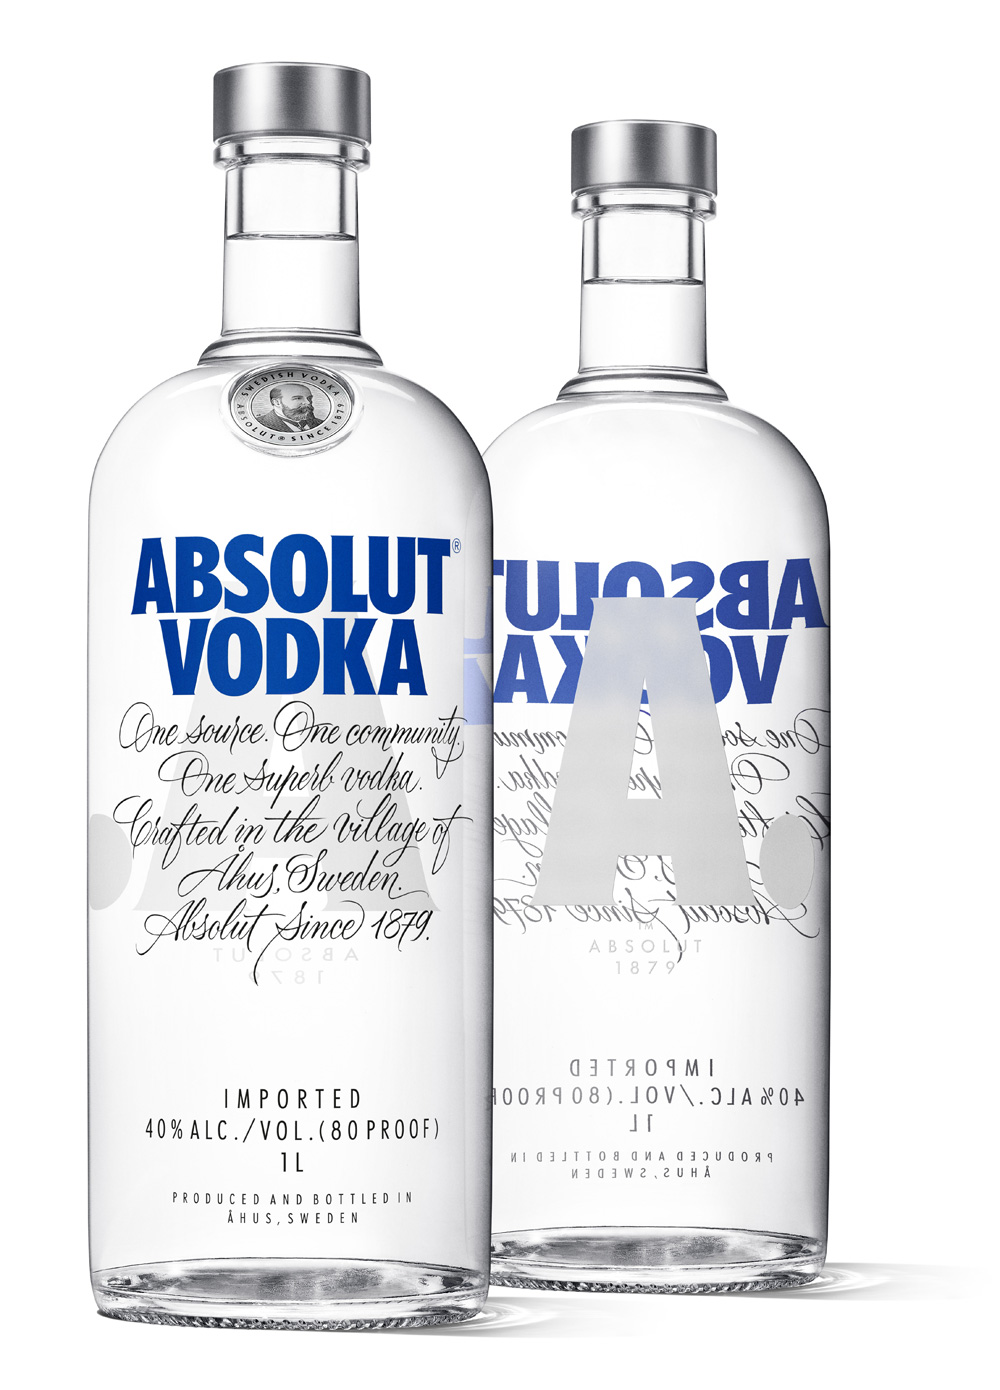 Brand New: New Packaging for Absolut Vodka by The Brand Union